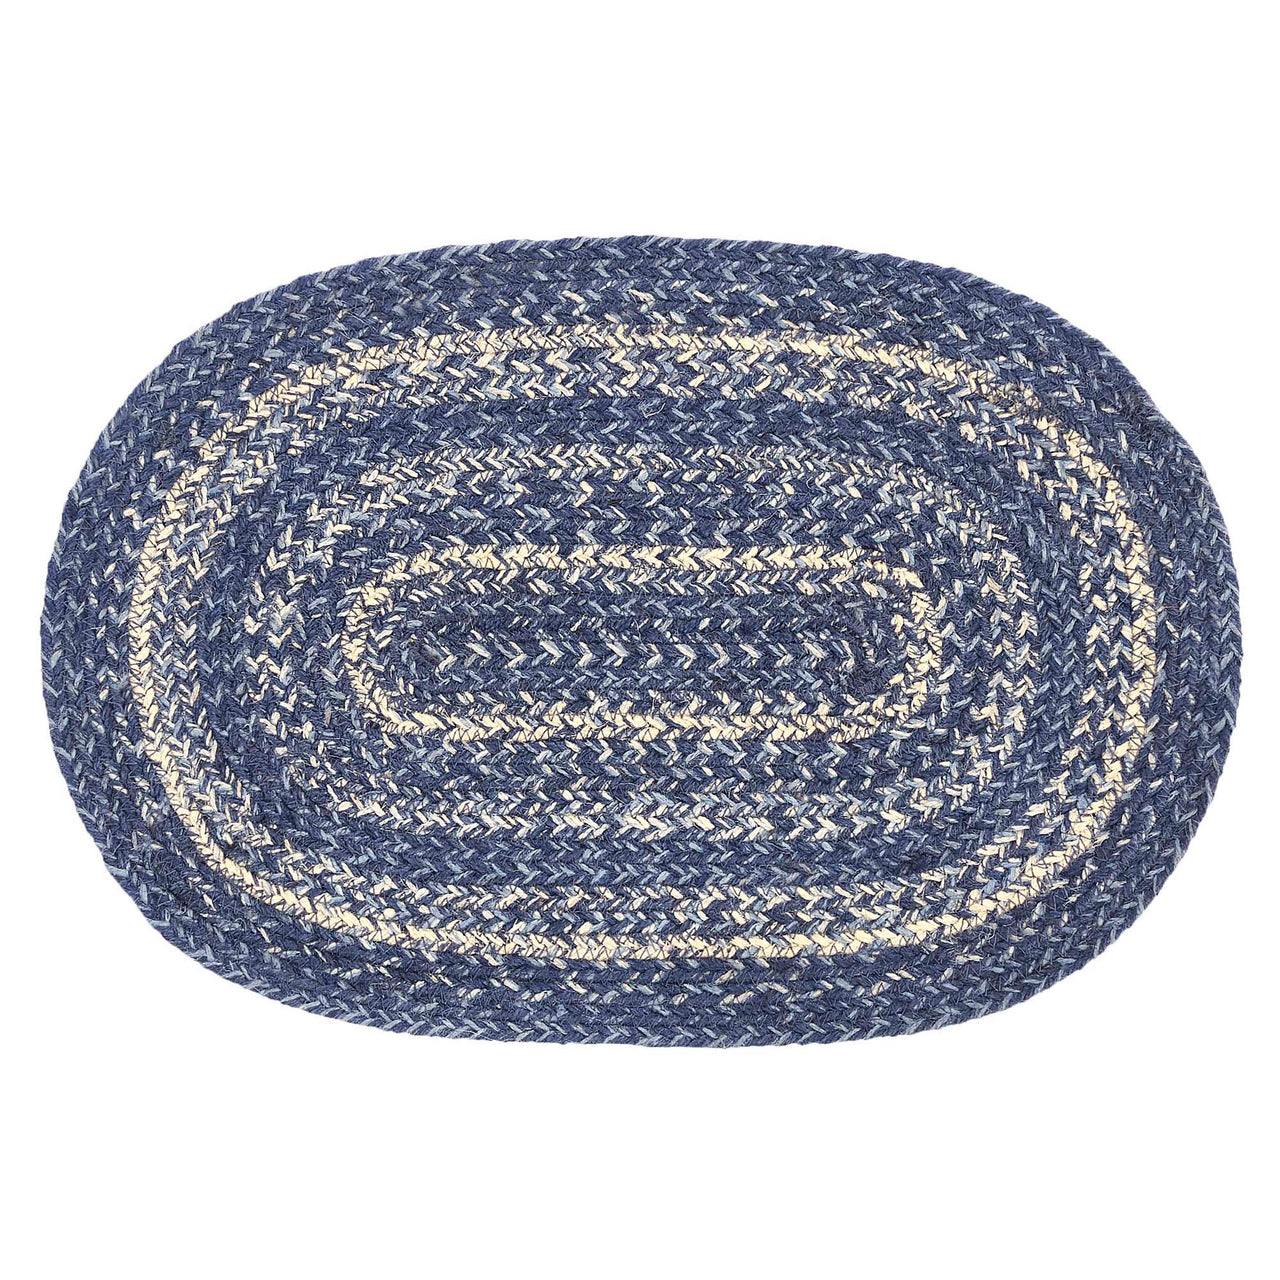 Great Falls Blue Jute Braided Oval Placemat 12"x18" VHC Brands